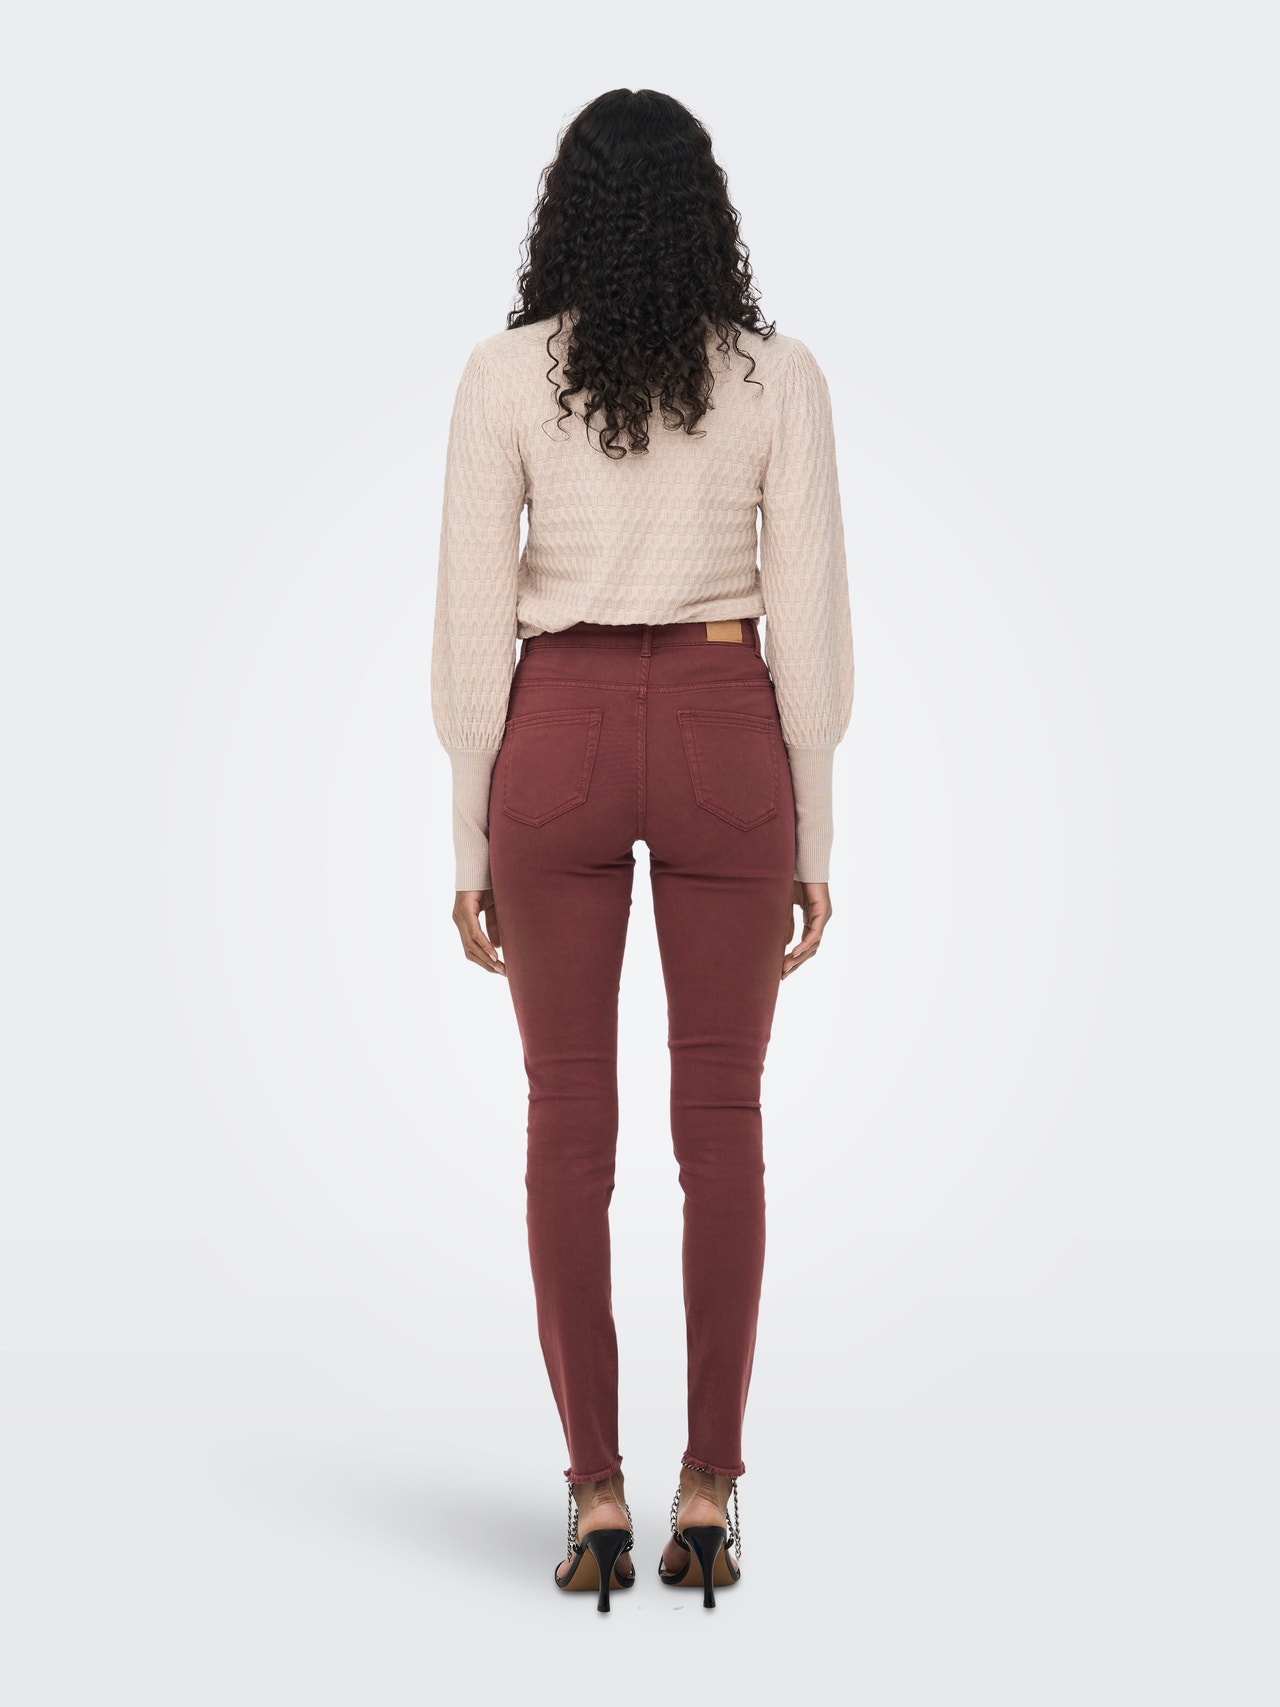 ONLY Skinny HW Trousers -Spiced Apple - 15264876